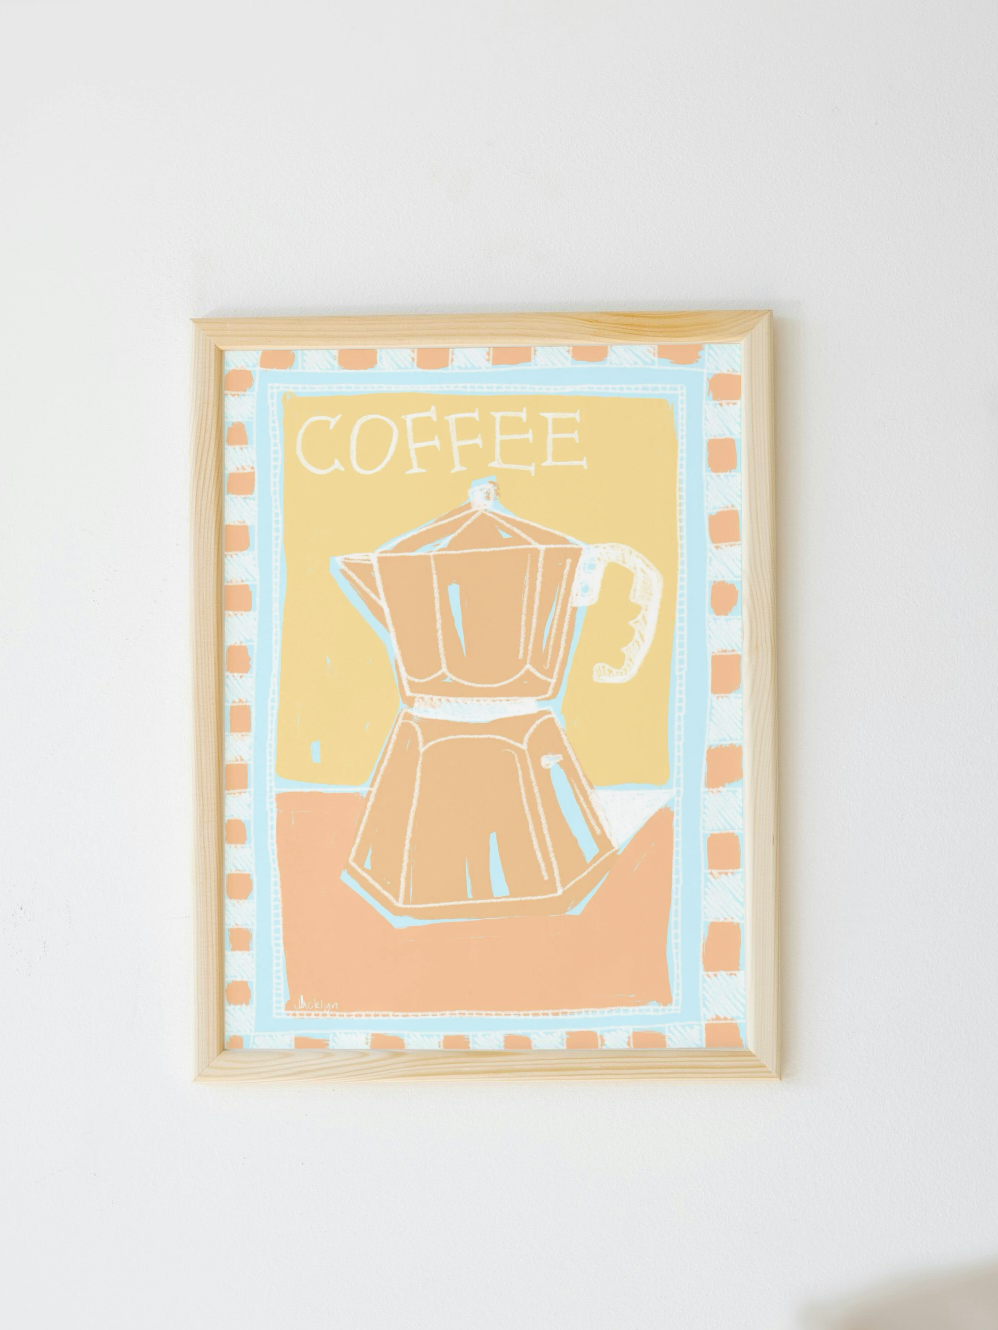 Morning Coffee Poster Print